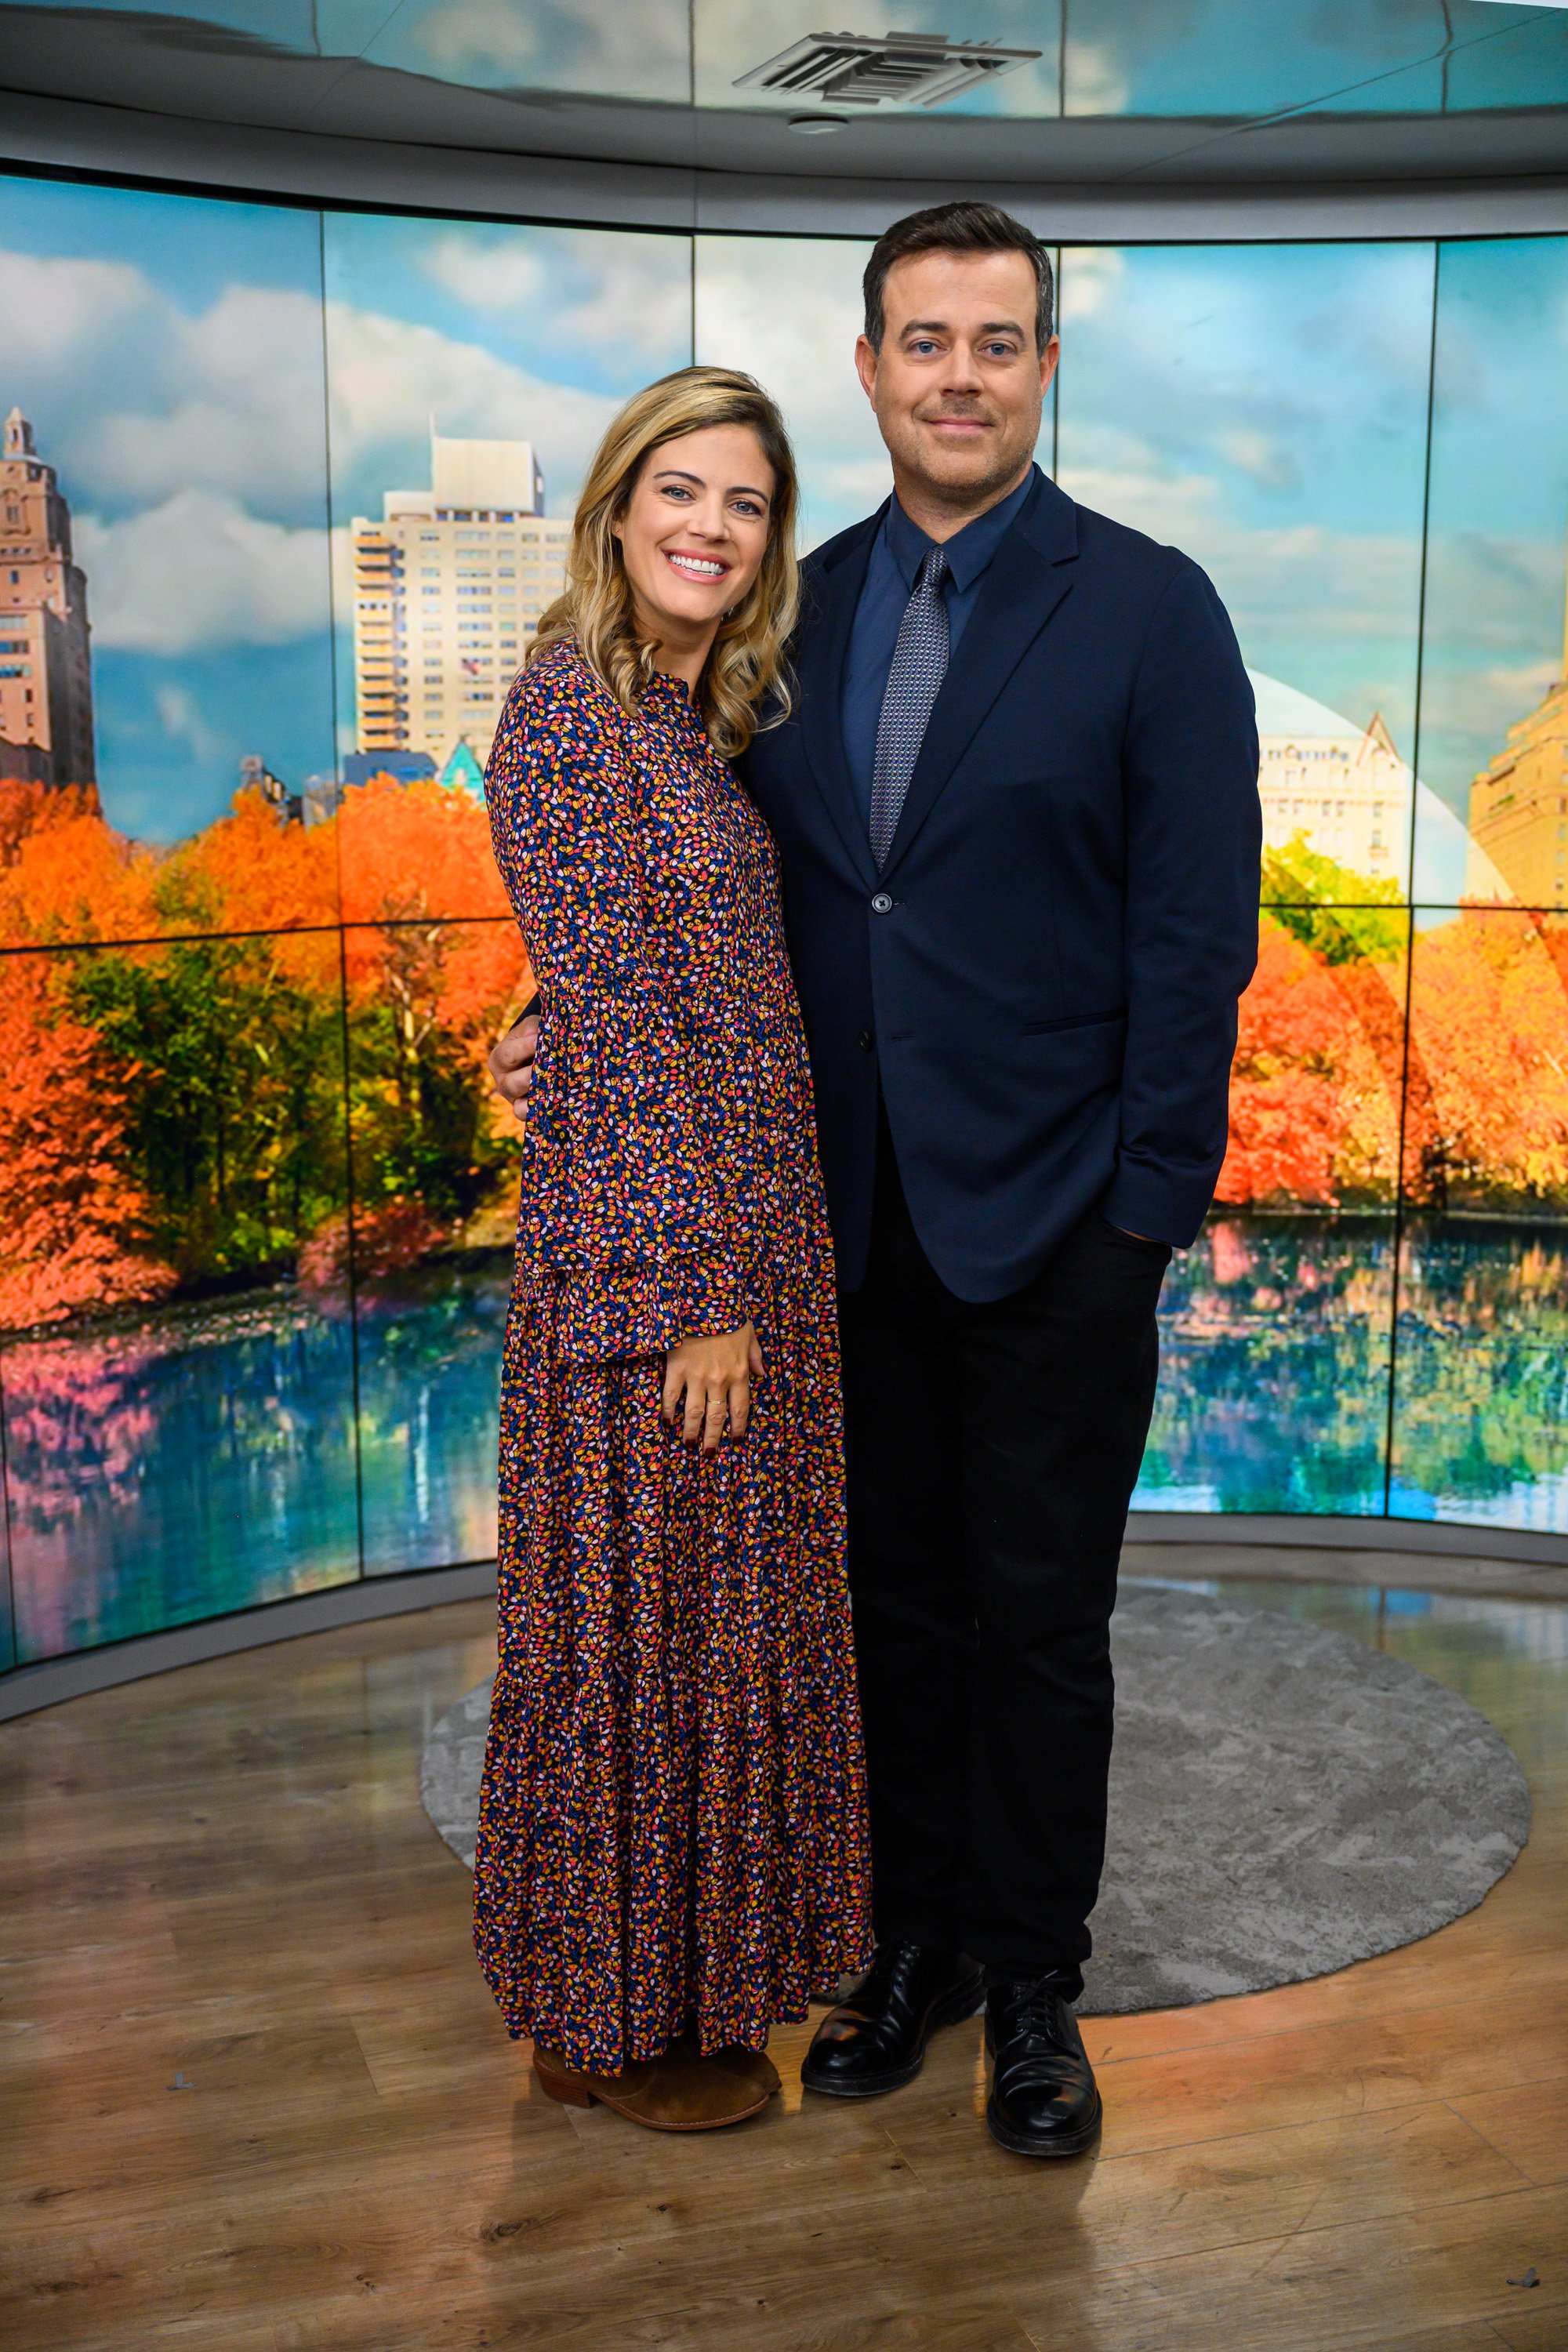 Siri and Carson Daly on an episode of the TODAY show in September 24, 2019. | Source: Getty Images